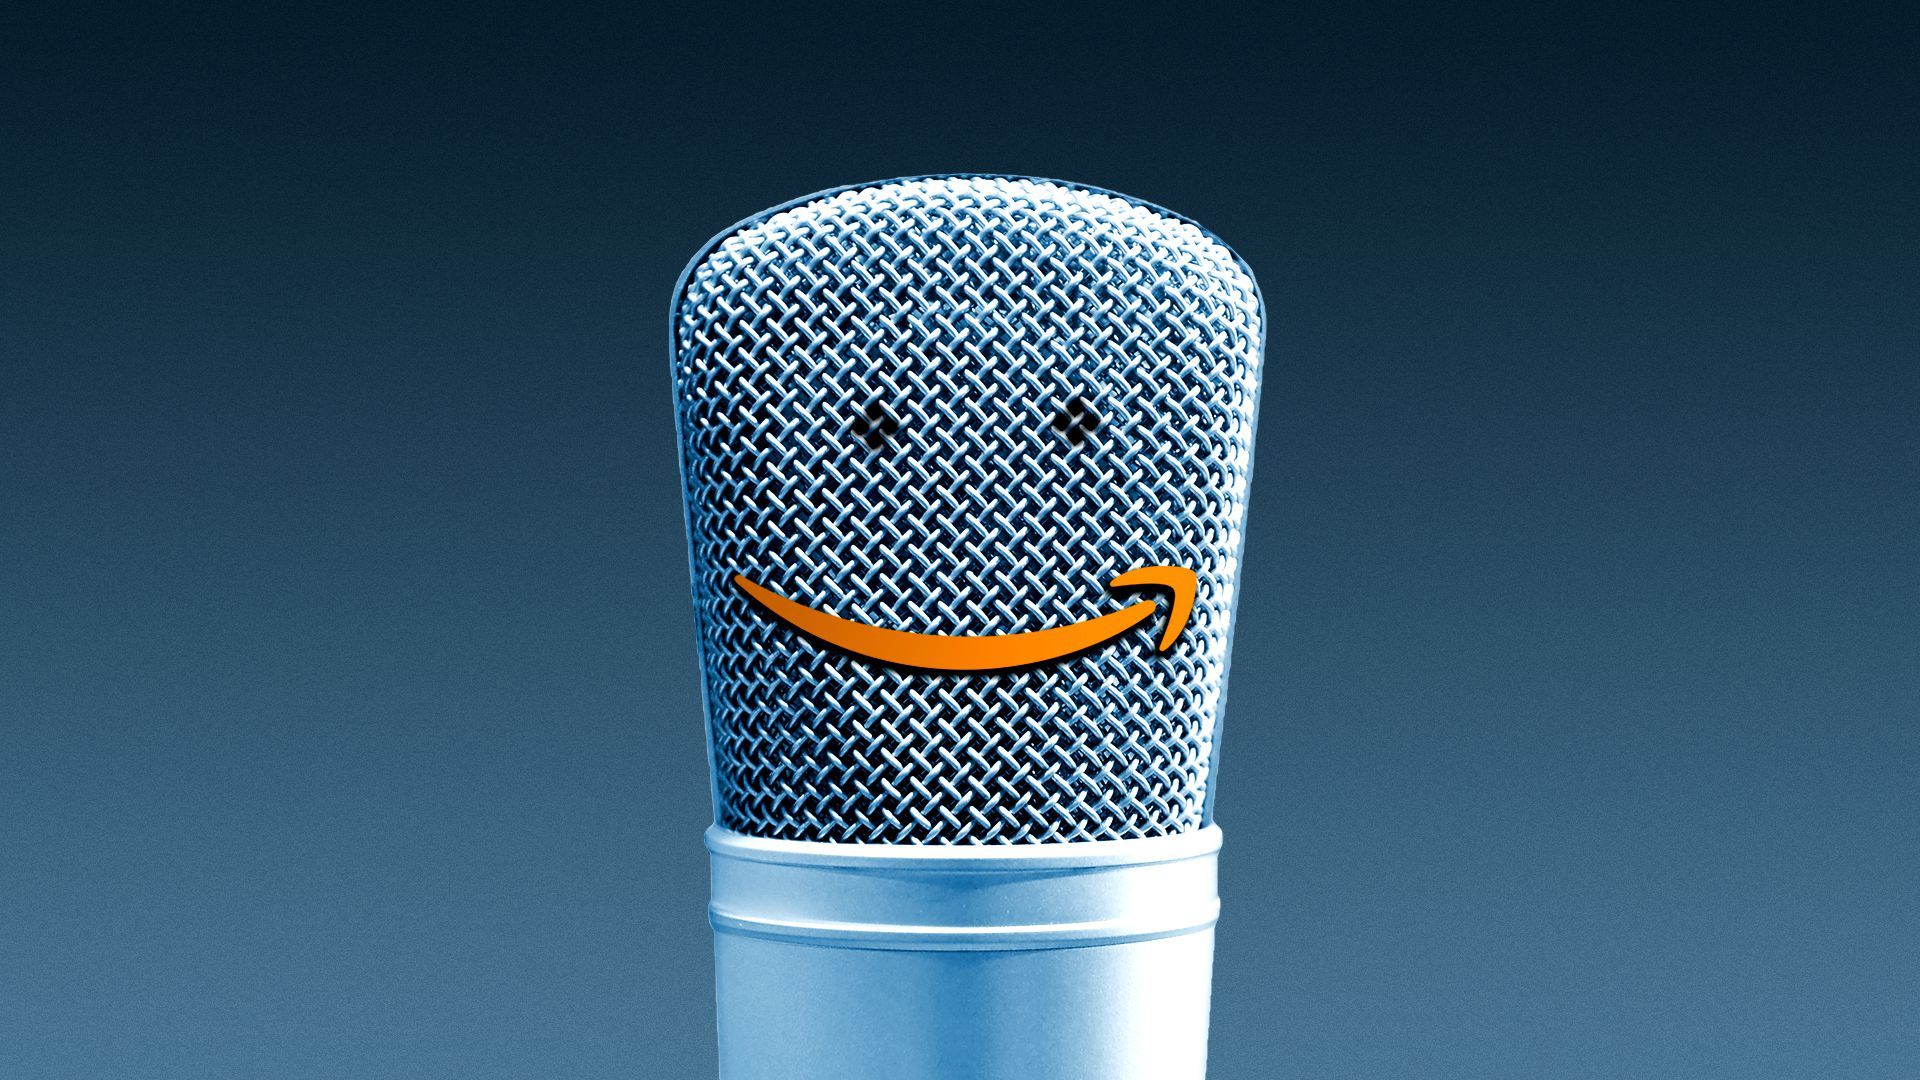 Illustration of a microphone with a smiley face made from the Amazon logo